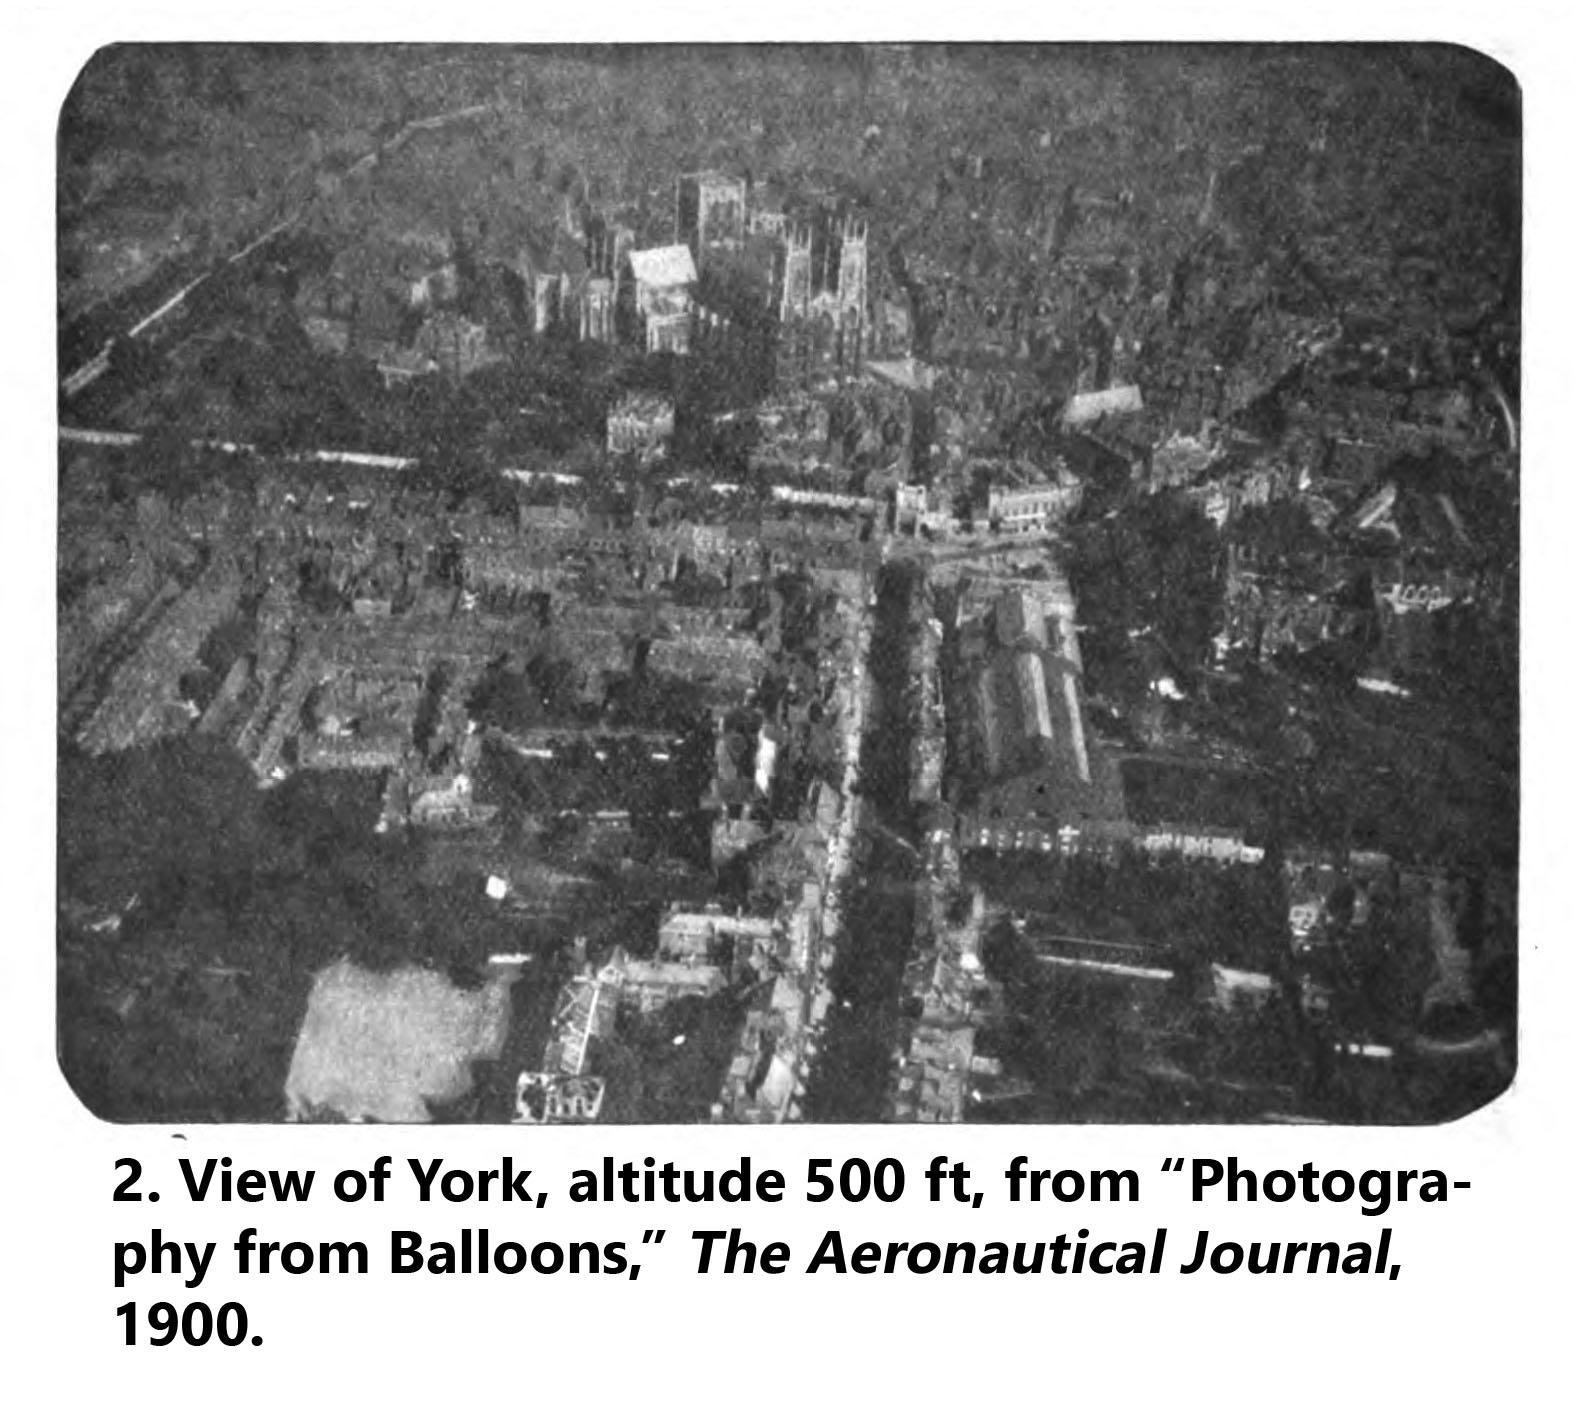 Aerial photo of the City of York from 500 ft, 1900